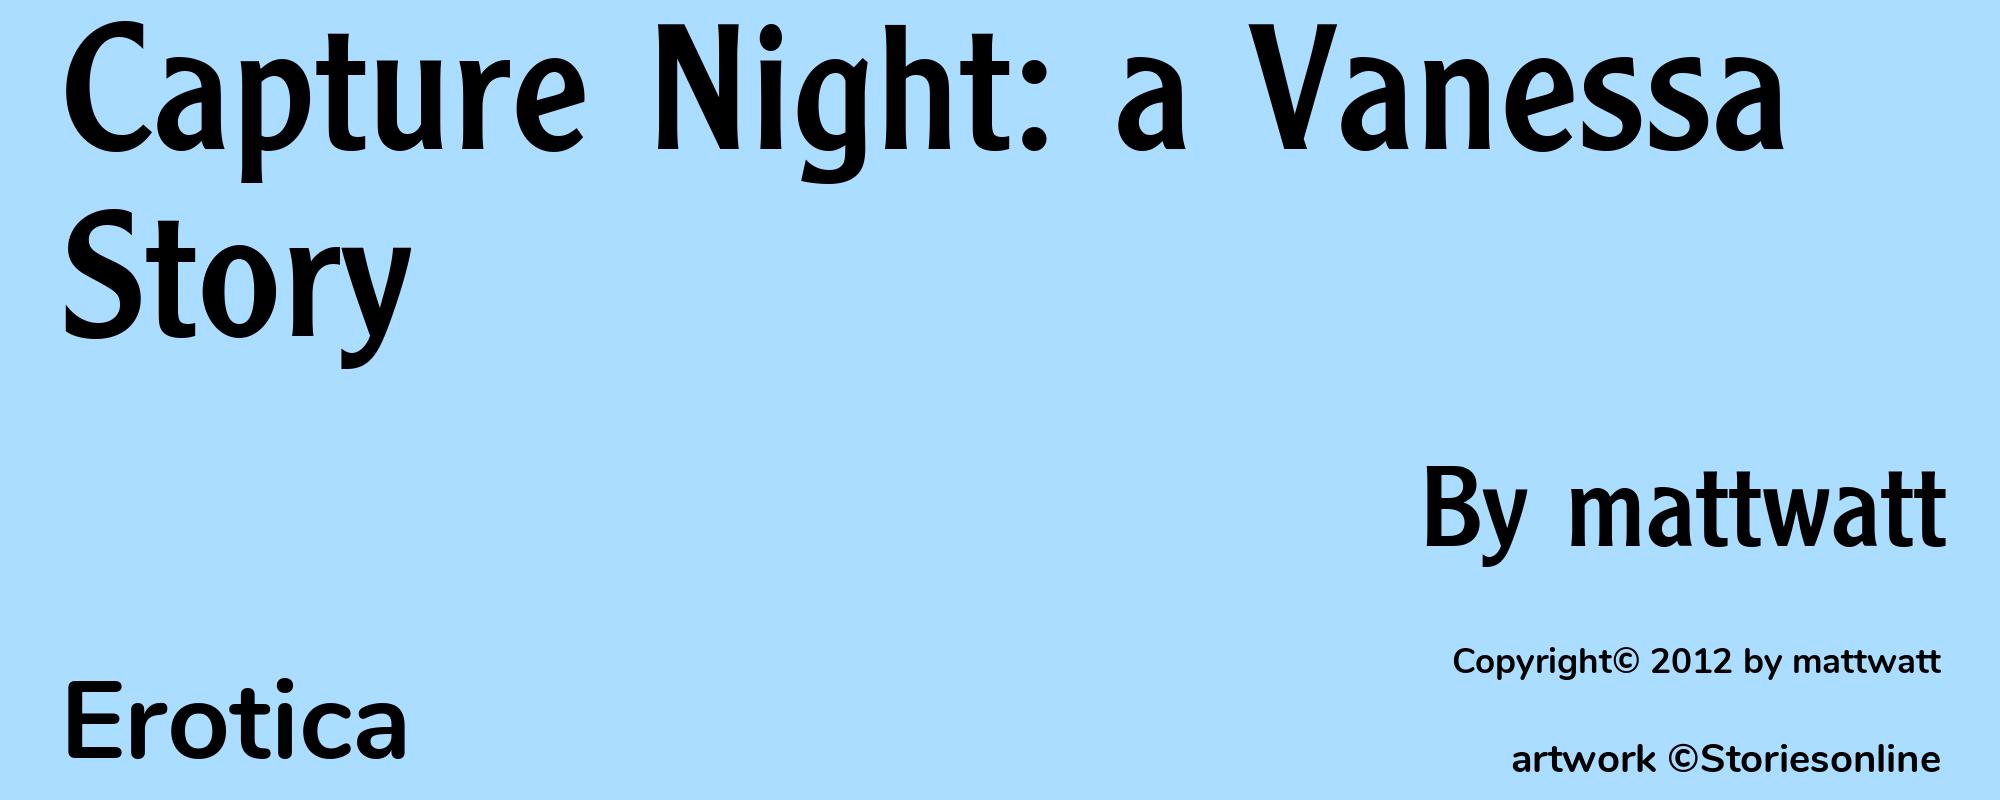 Capture Night: a Vanessa Story - Cover